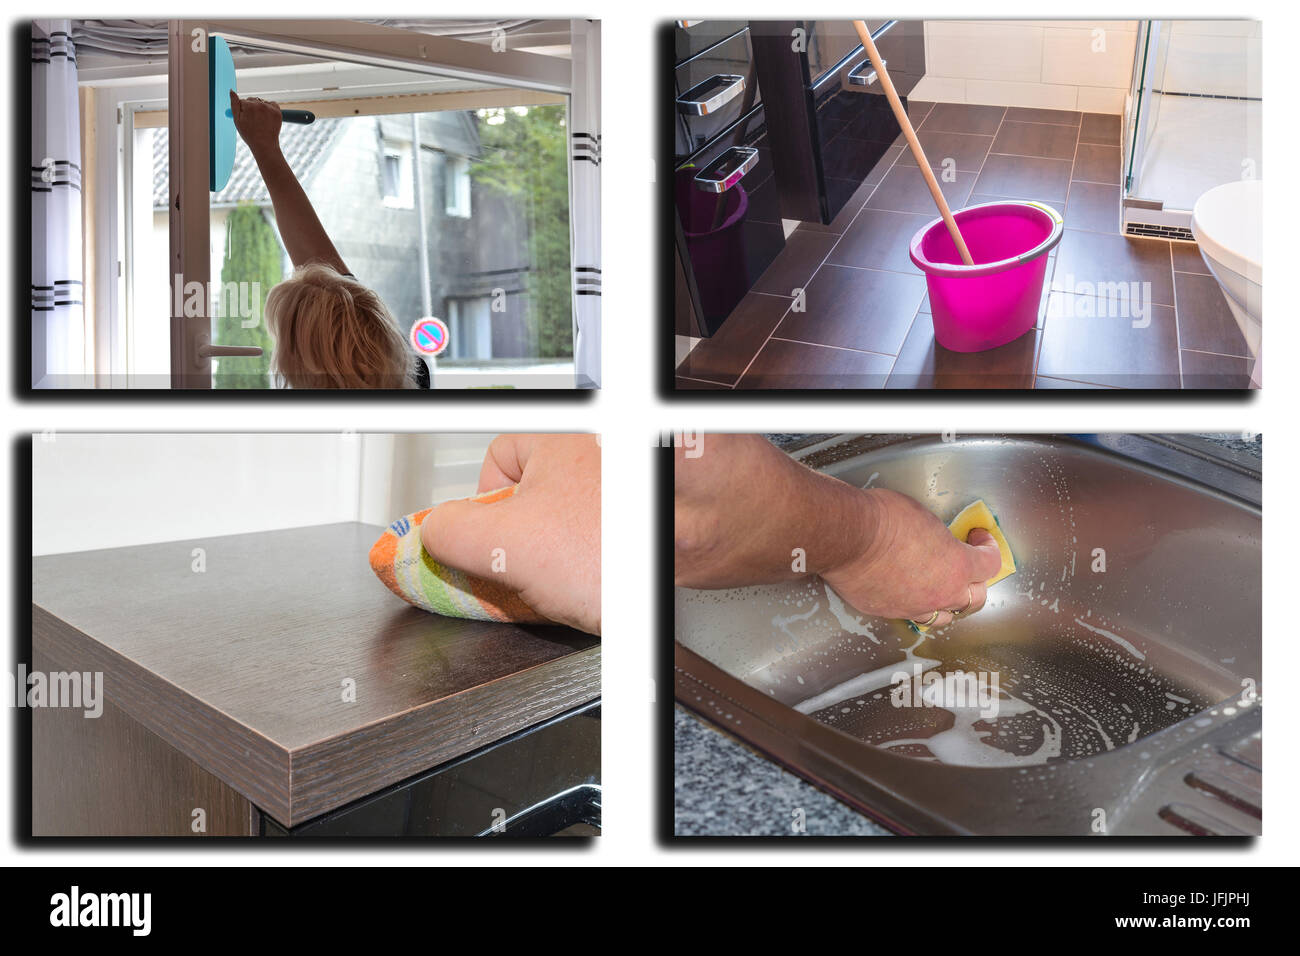 Image is divided into 4 sections about housework Stock Photo